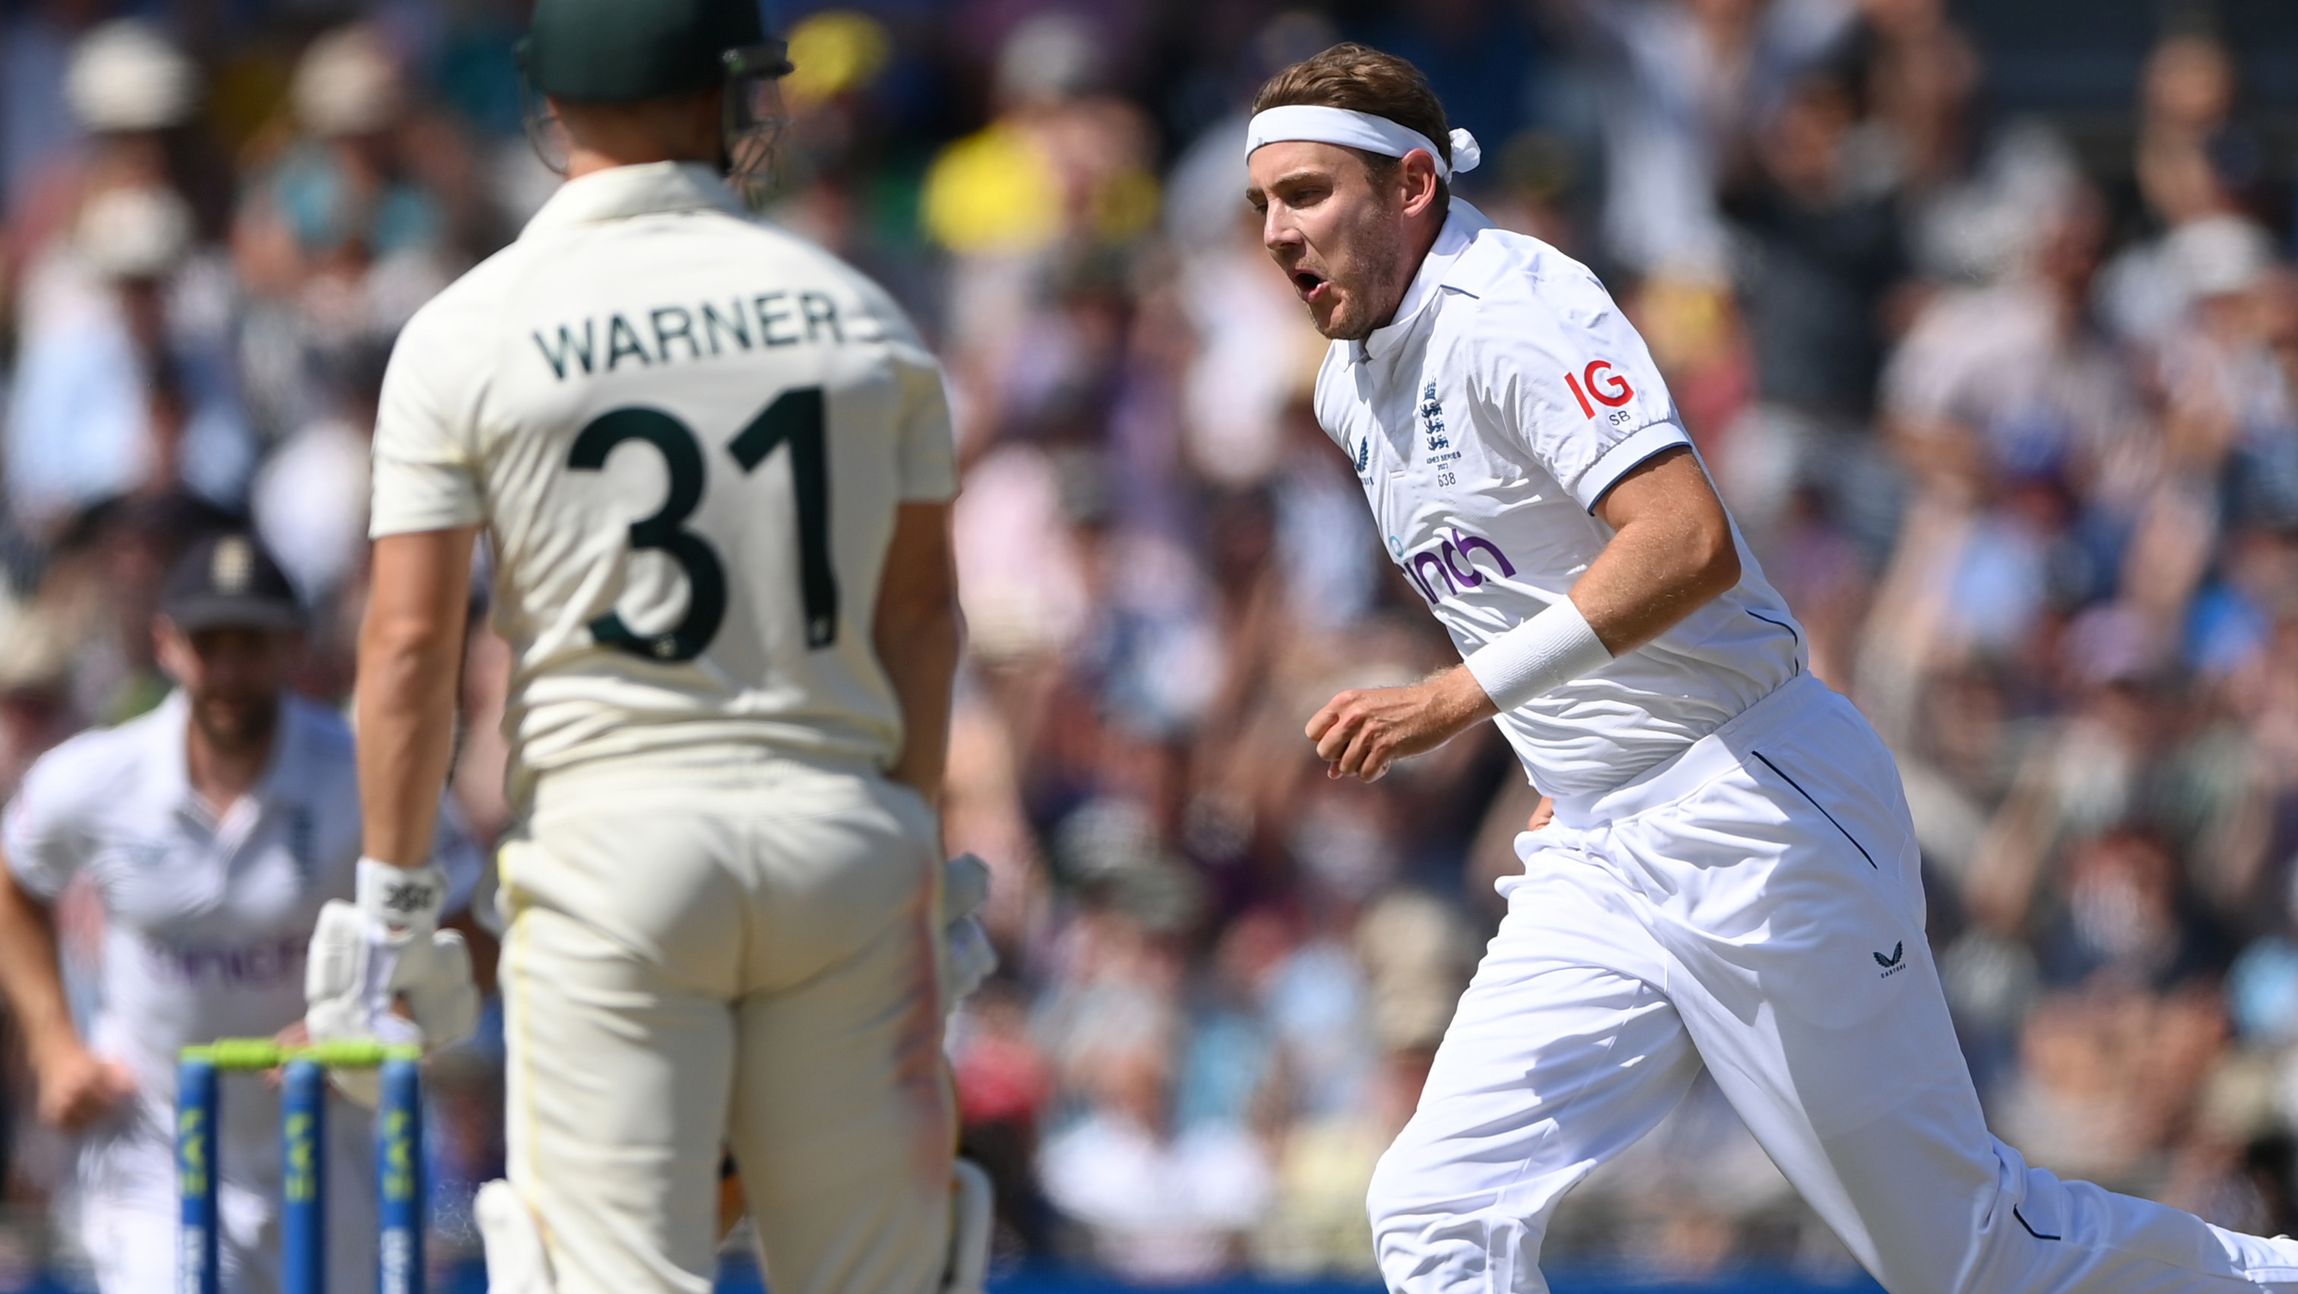 Stuart Broad celebrates dismissing David Warner of during day two of the third Test between England and Australia at Headingley.